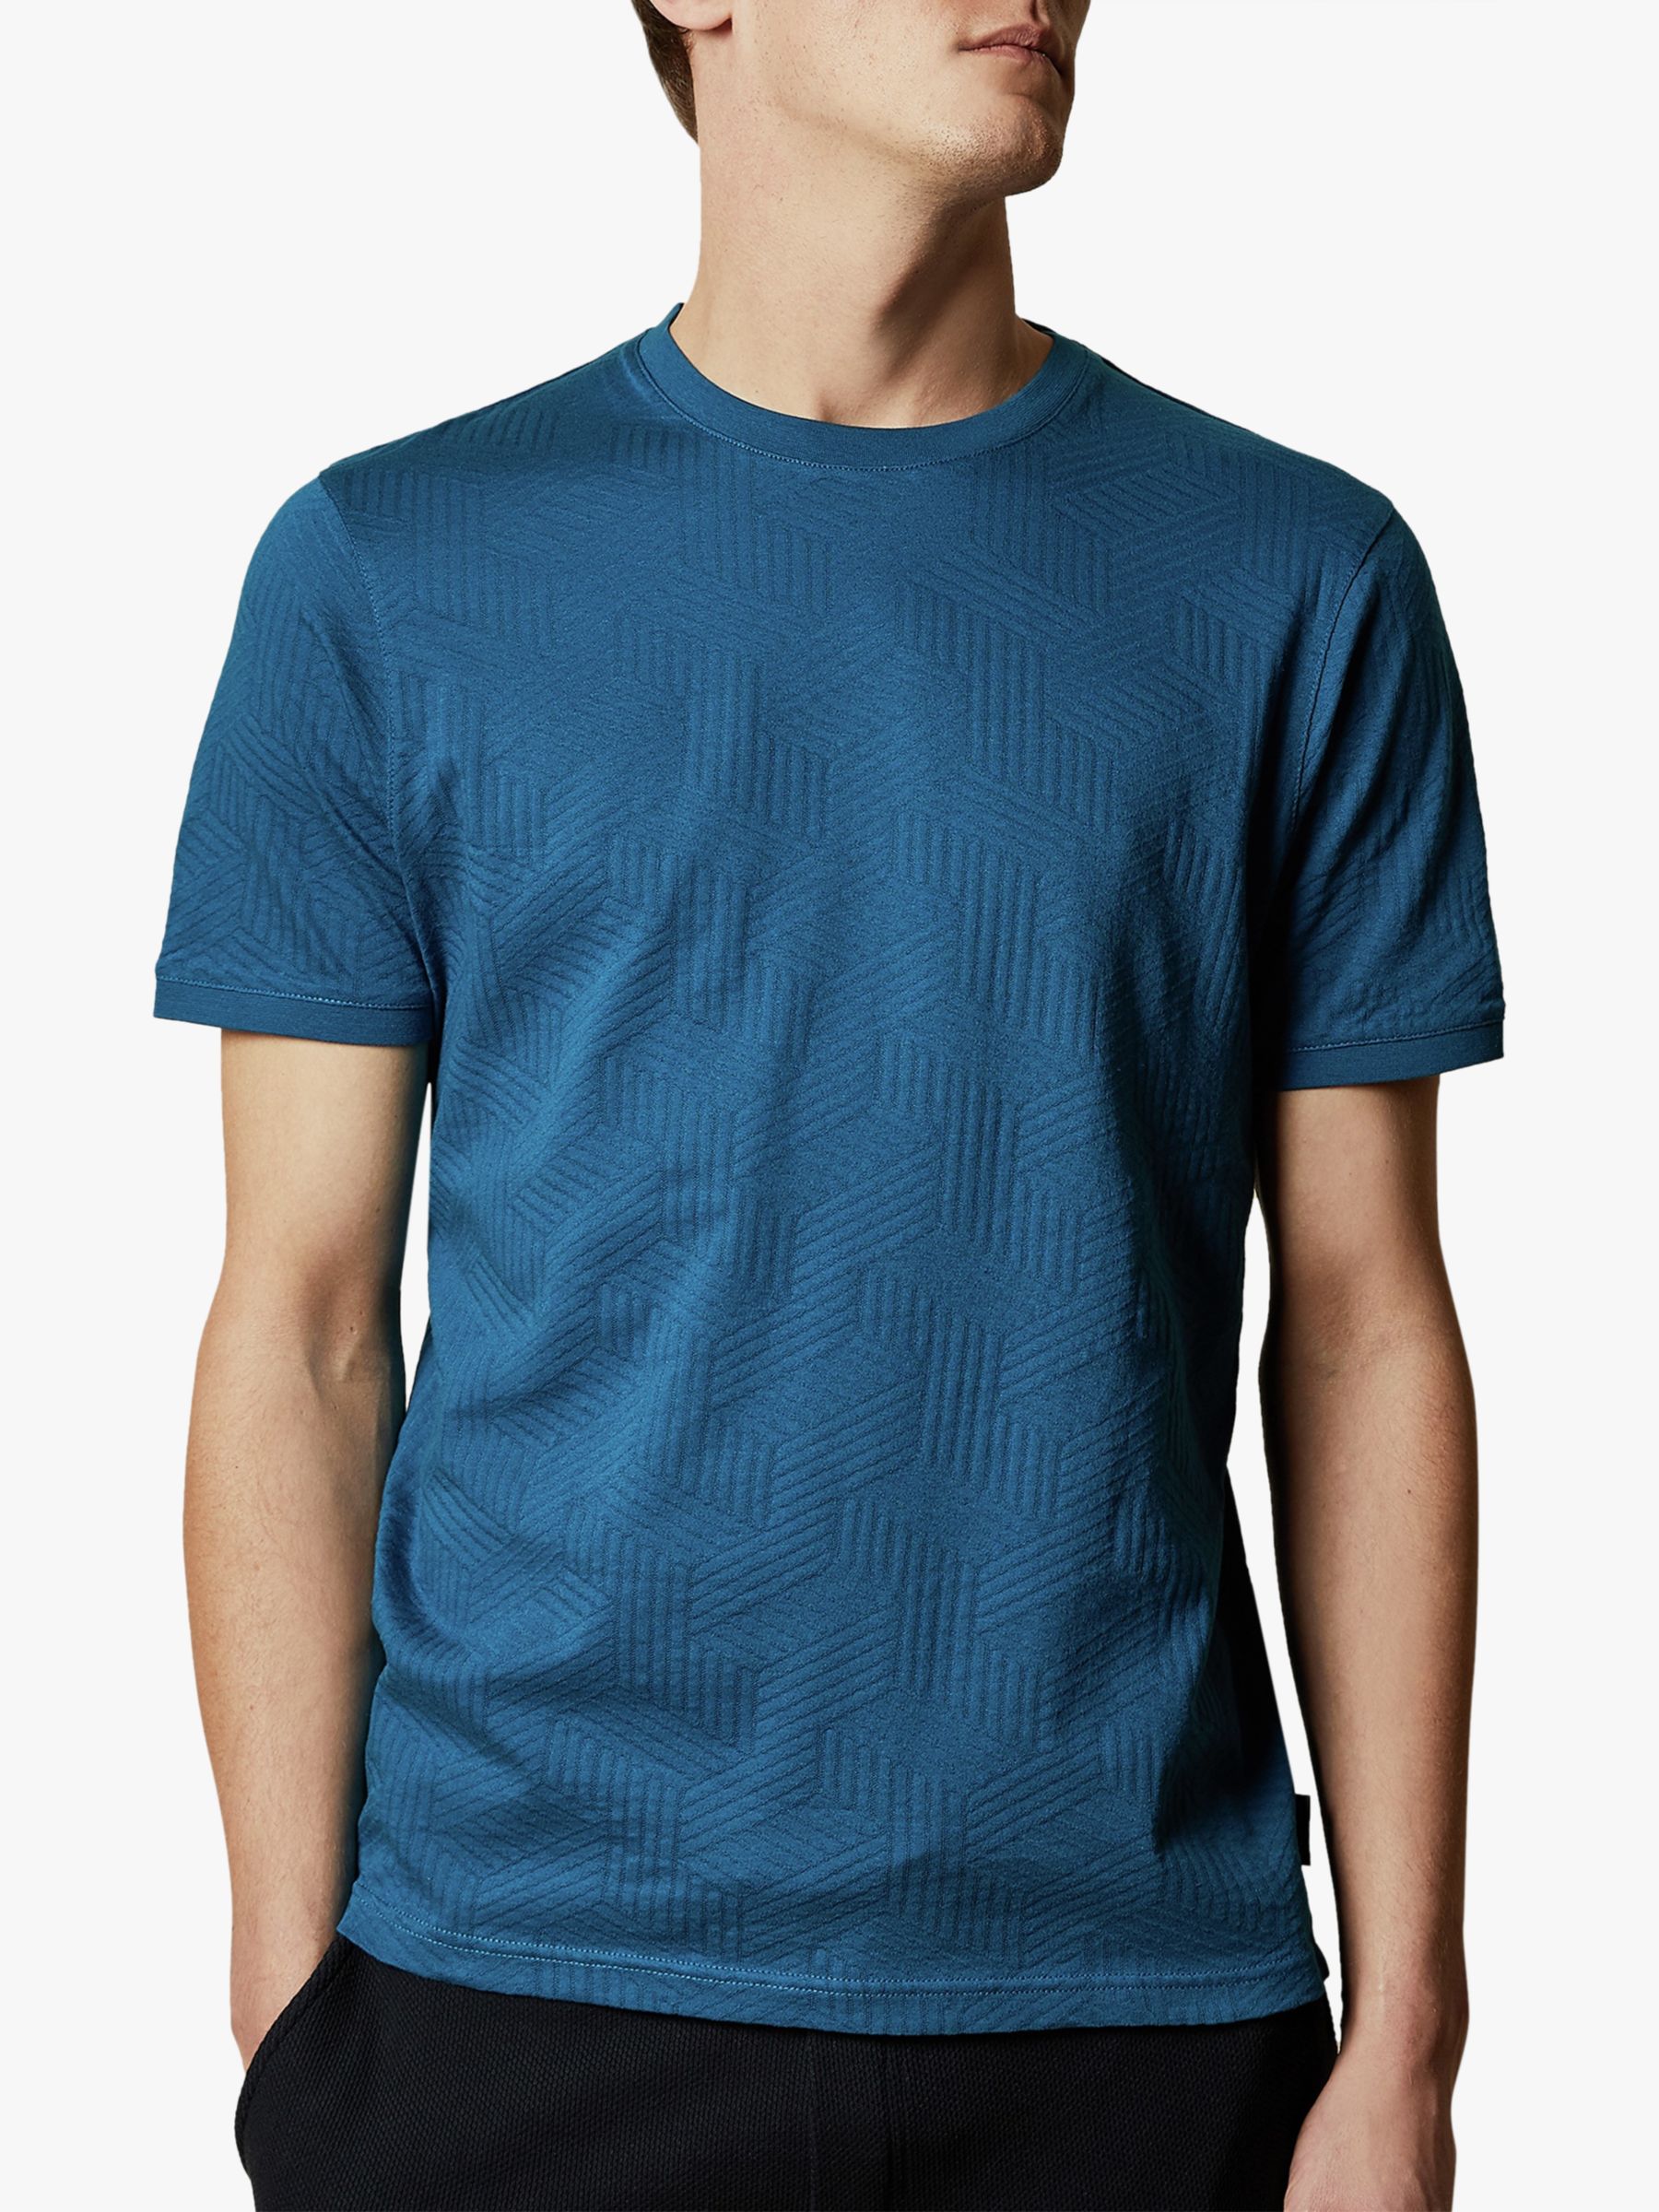 Ted Baker Twopee Textured Cotton T-Shirt